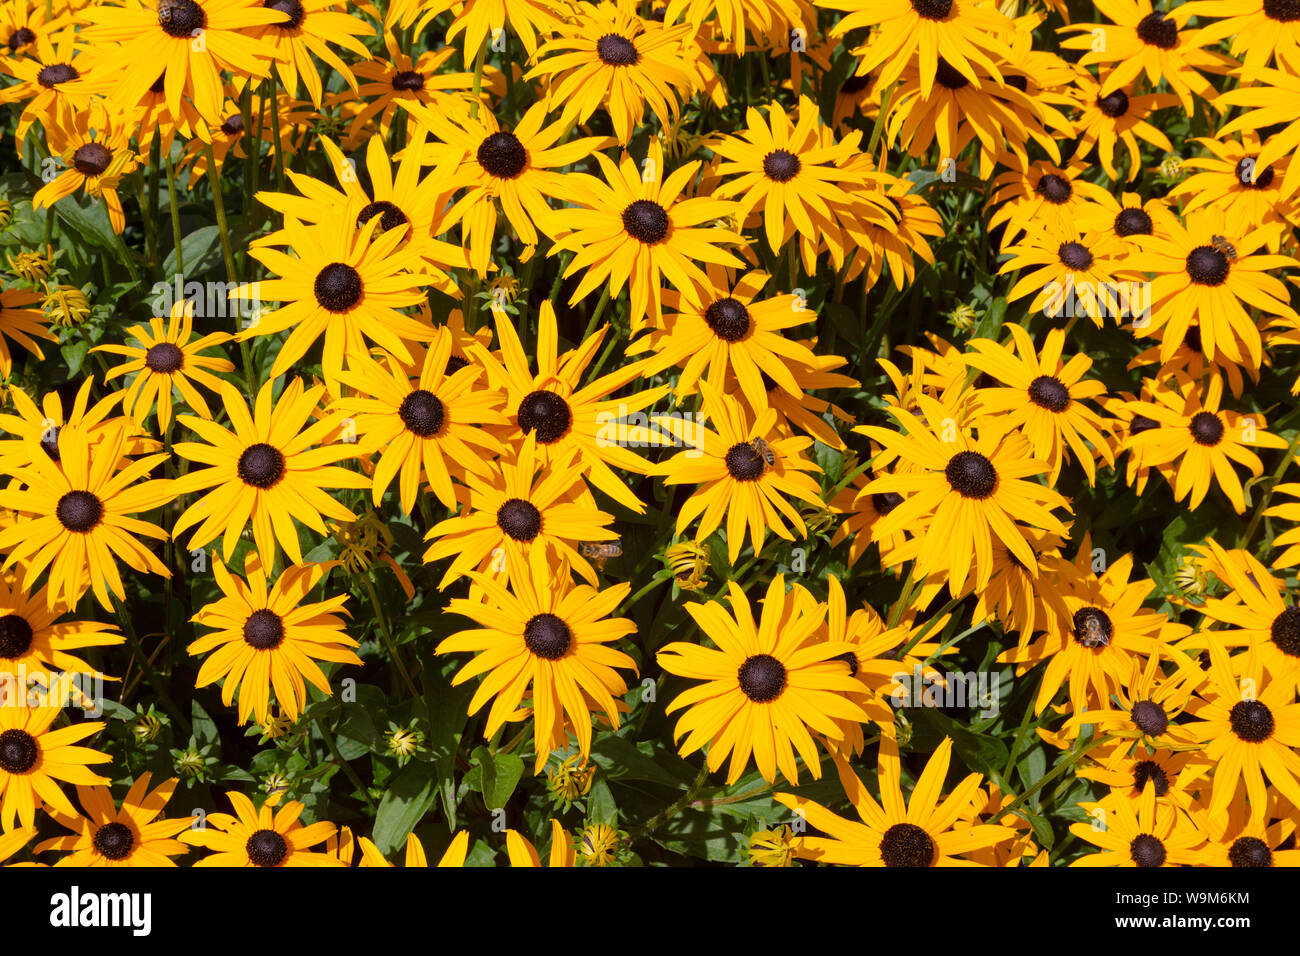 Rudbeckia Hirta, or Black Eyed Susan flowers, yellow daisy like flowers with a black centre. Stock Photo